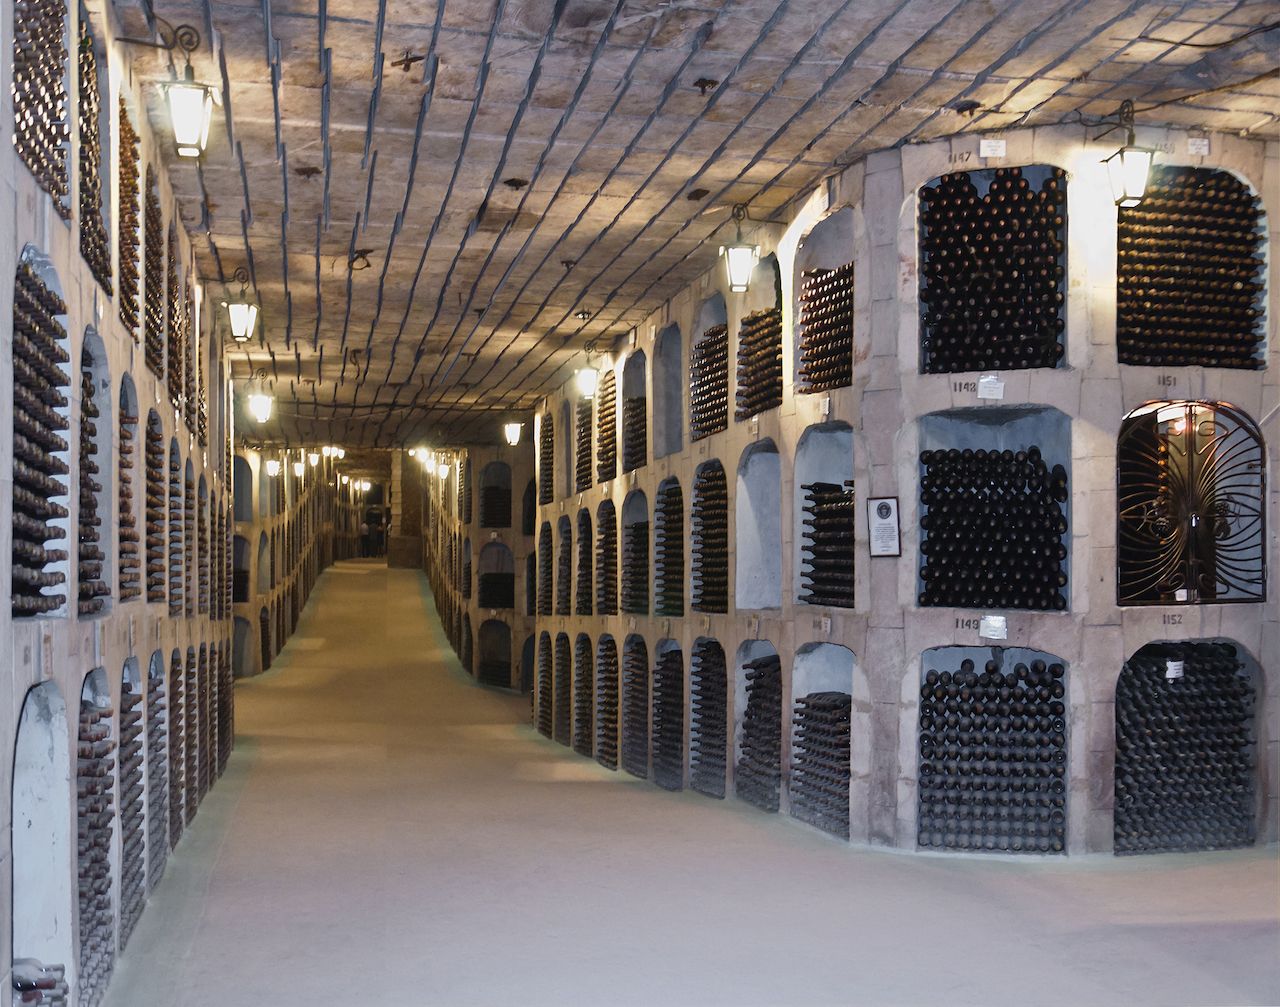 Oenophile's guide to the largest wine caves in the world